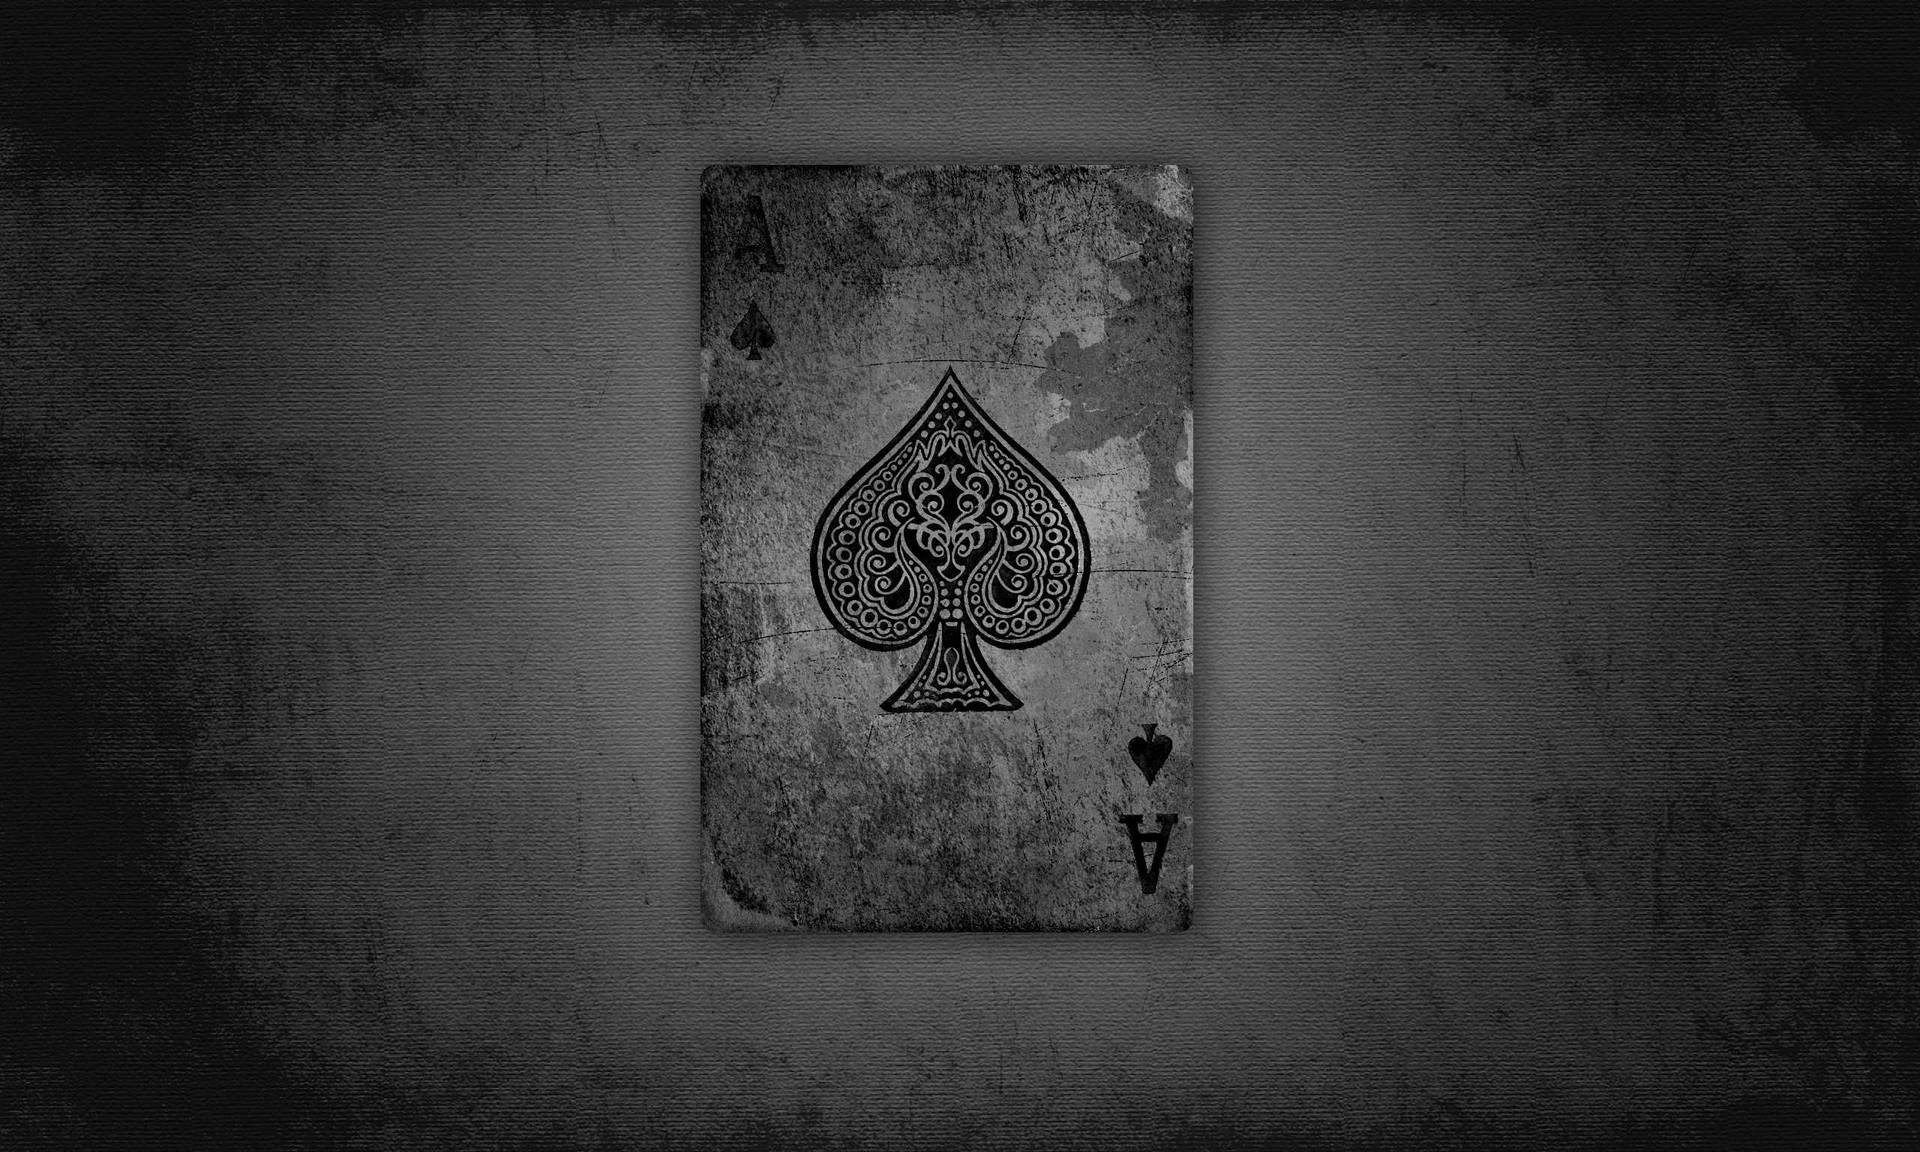 Cool Ace Card Wallpapers Wallpapers